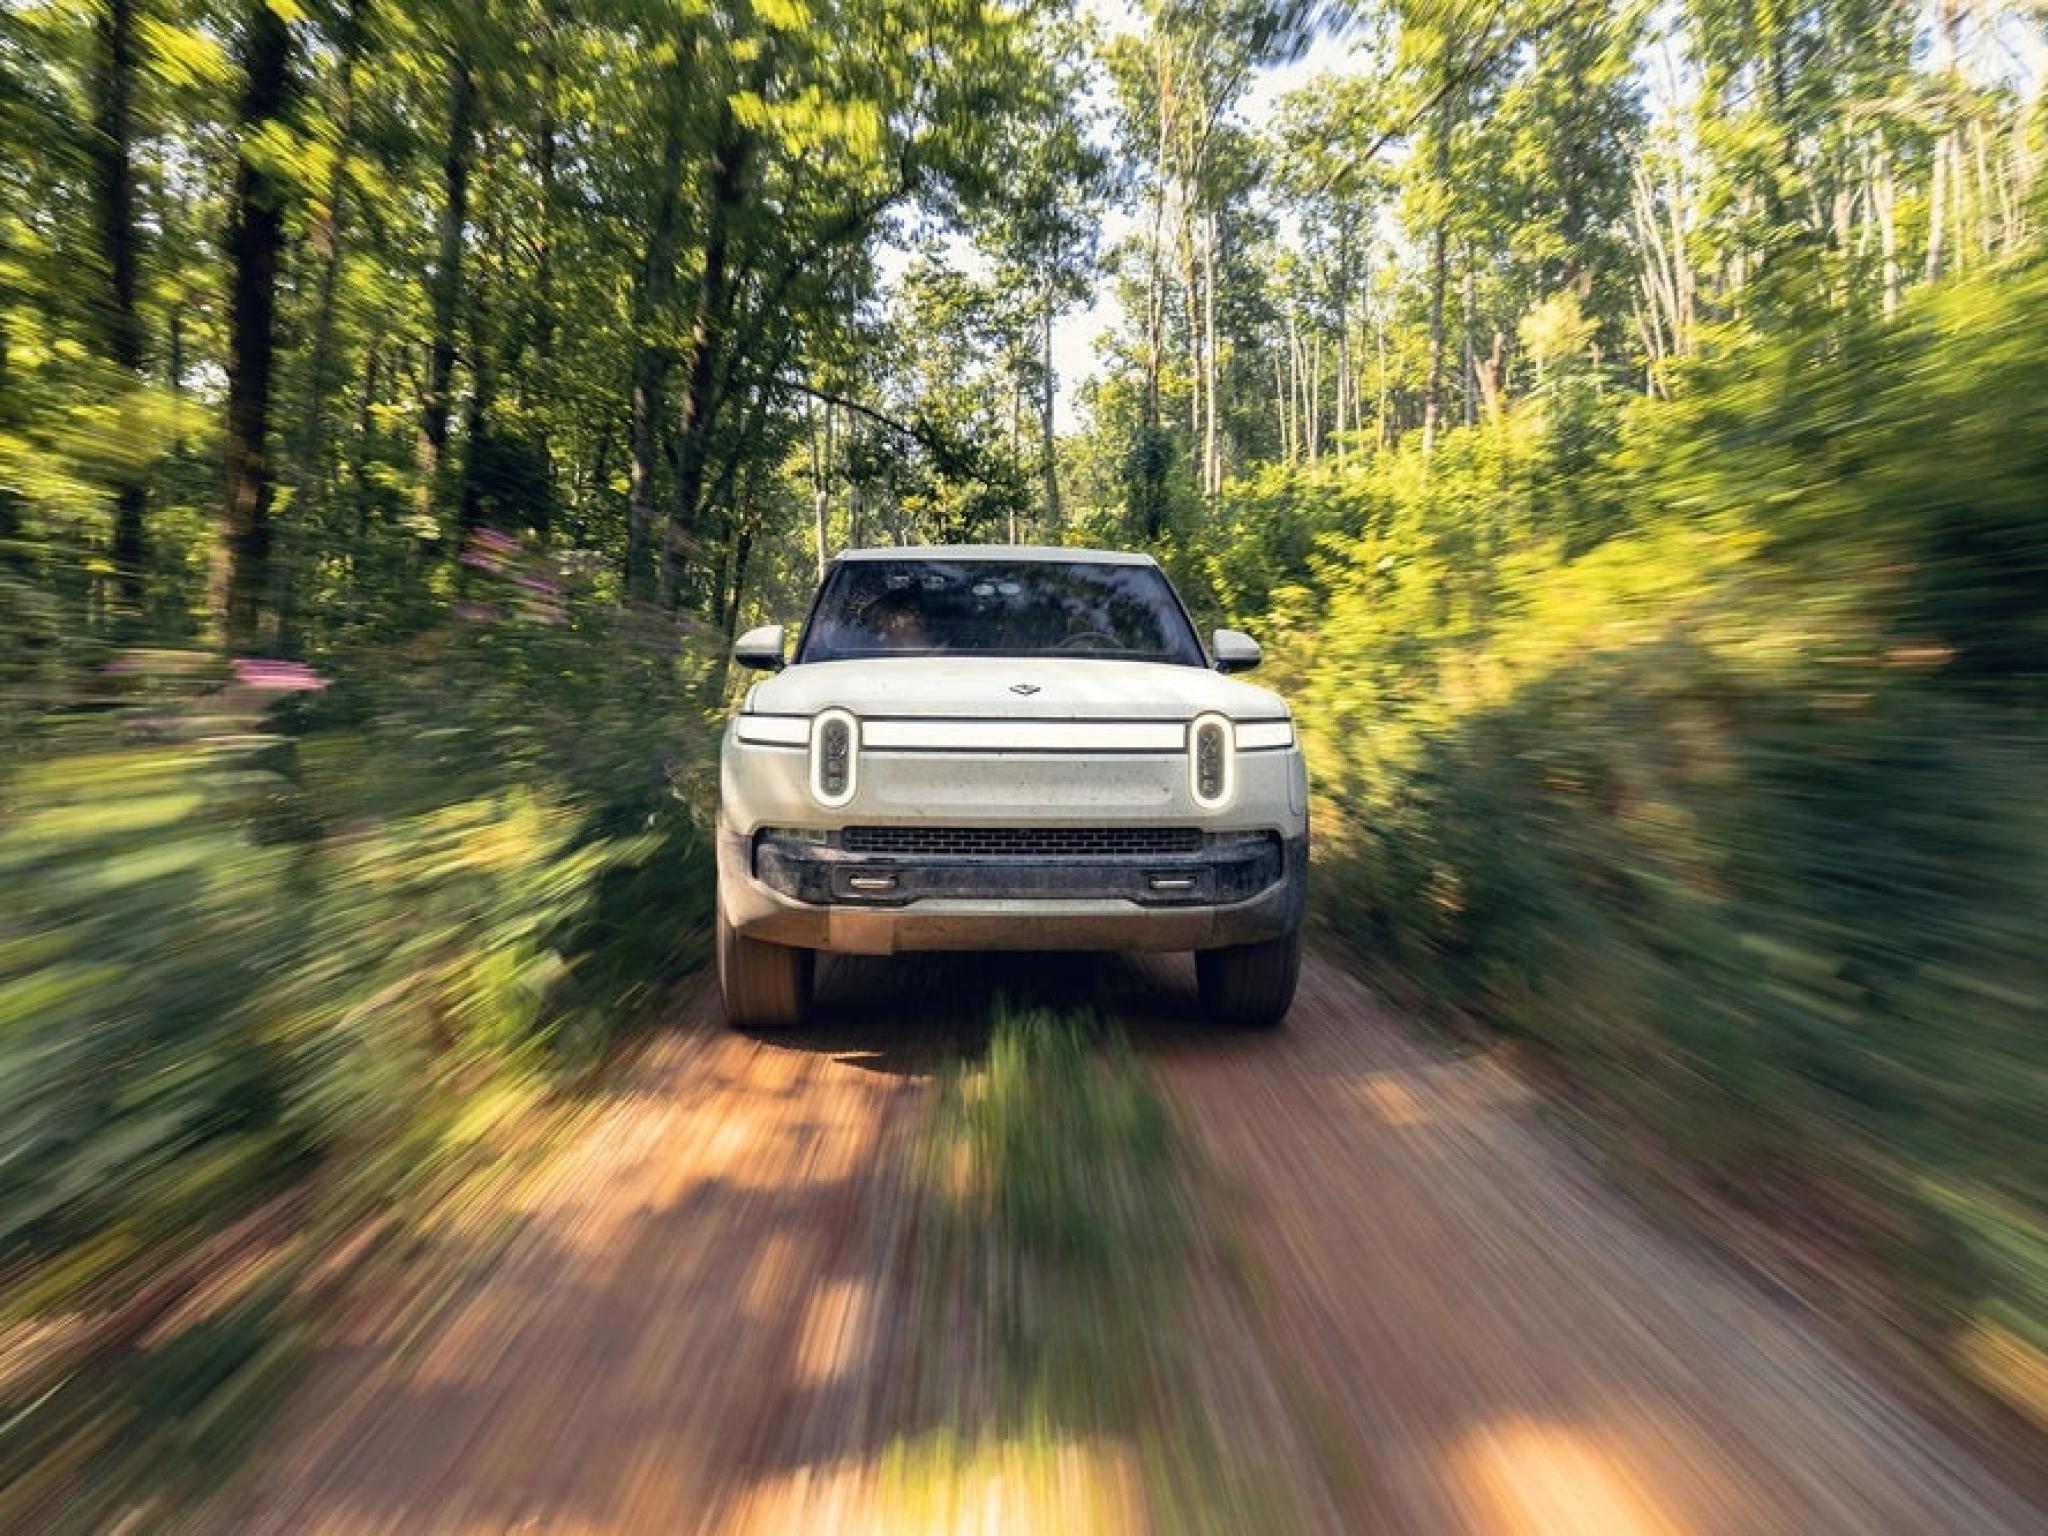  rivian-lucid--nikola-facing-ev-winter-challenge-reportedly-struggling-with-cost-cutting-strategies-to-boost-cash 